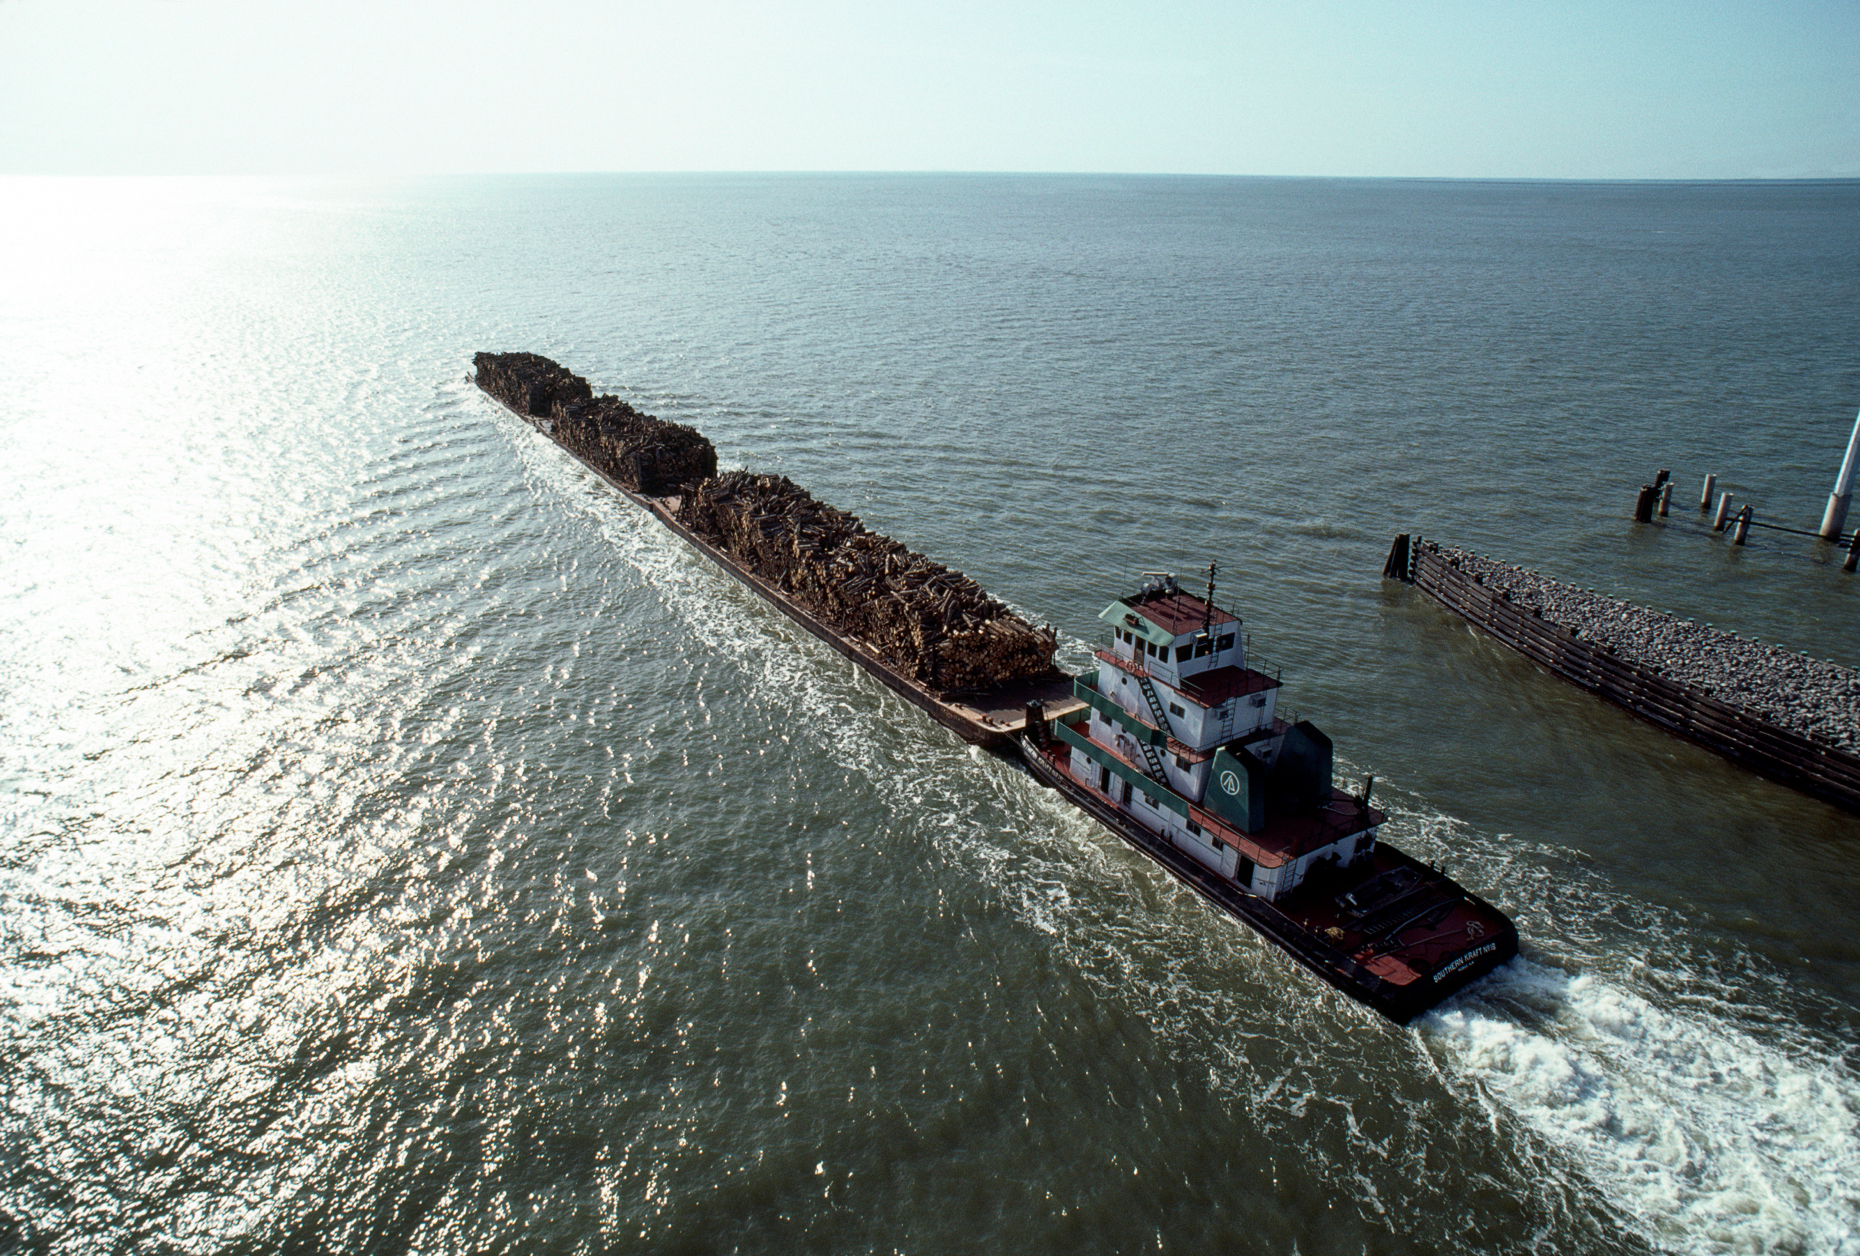 Tug boat pushing barges loaded with logs up the Houston Shipping Channel, Texas, USA